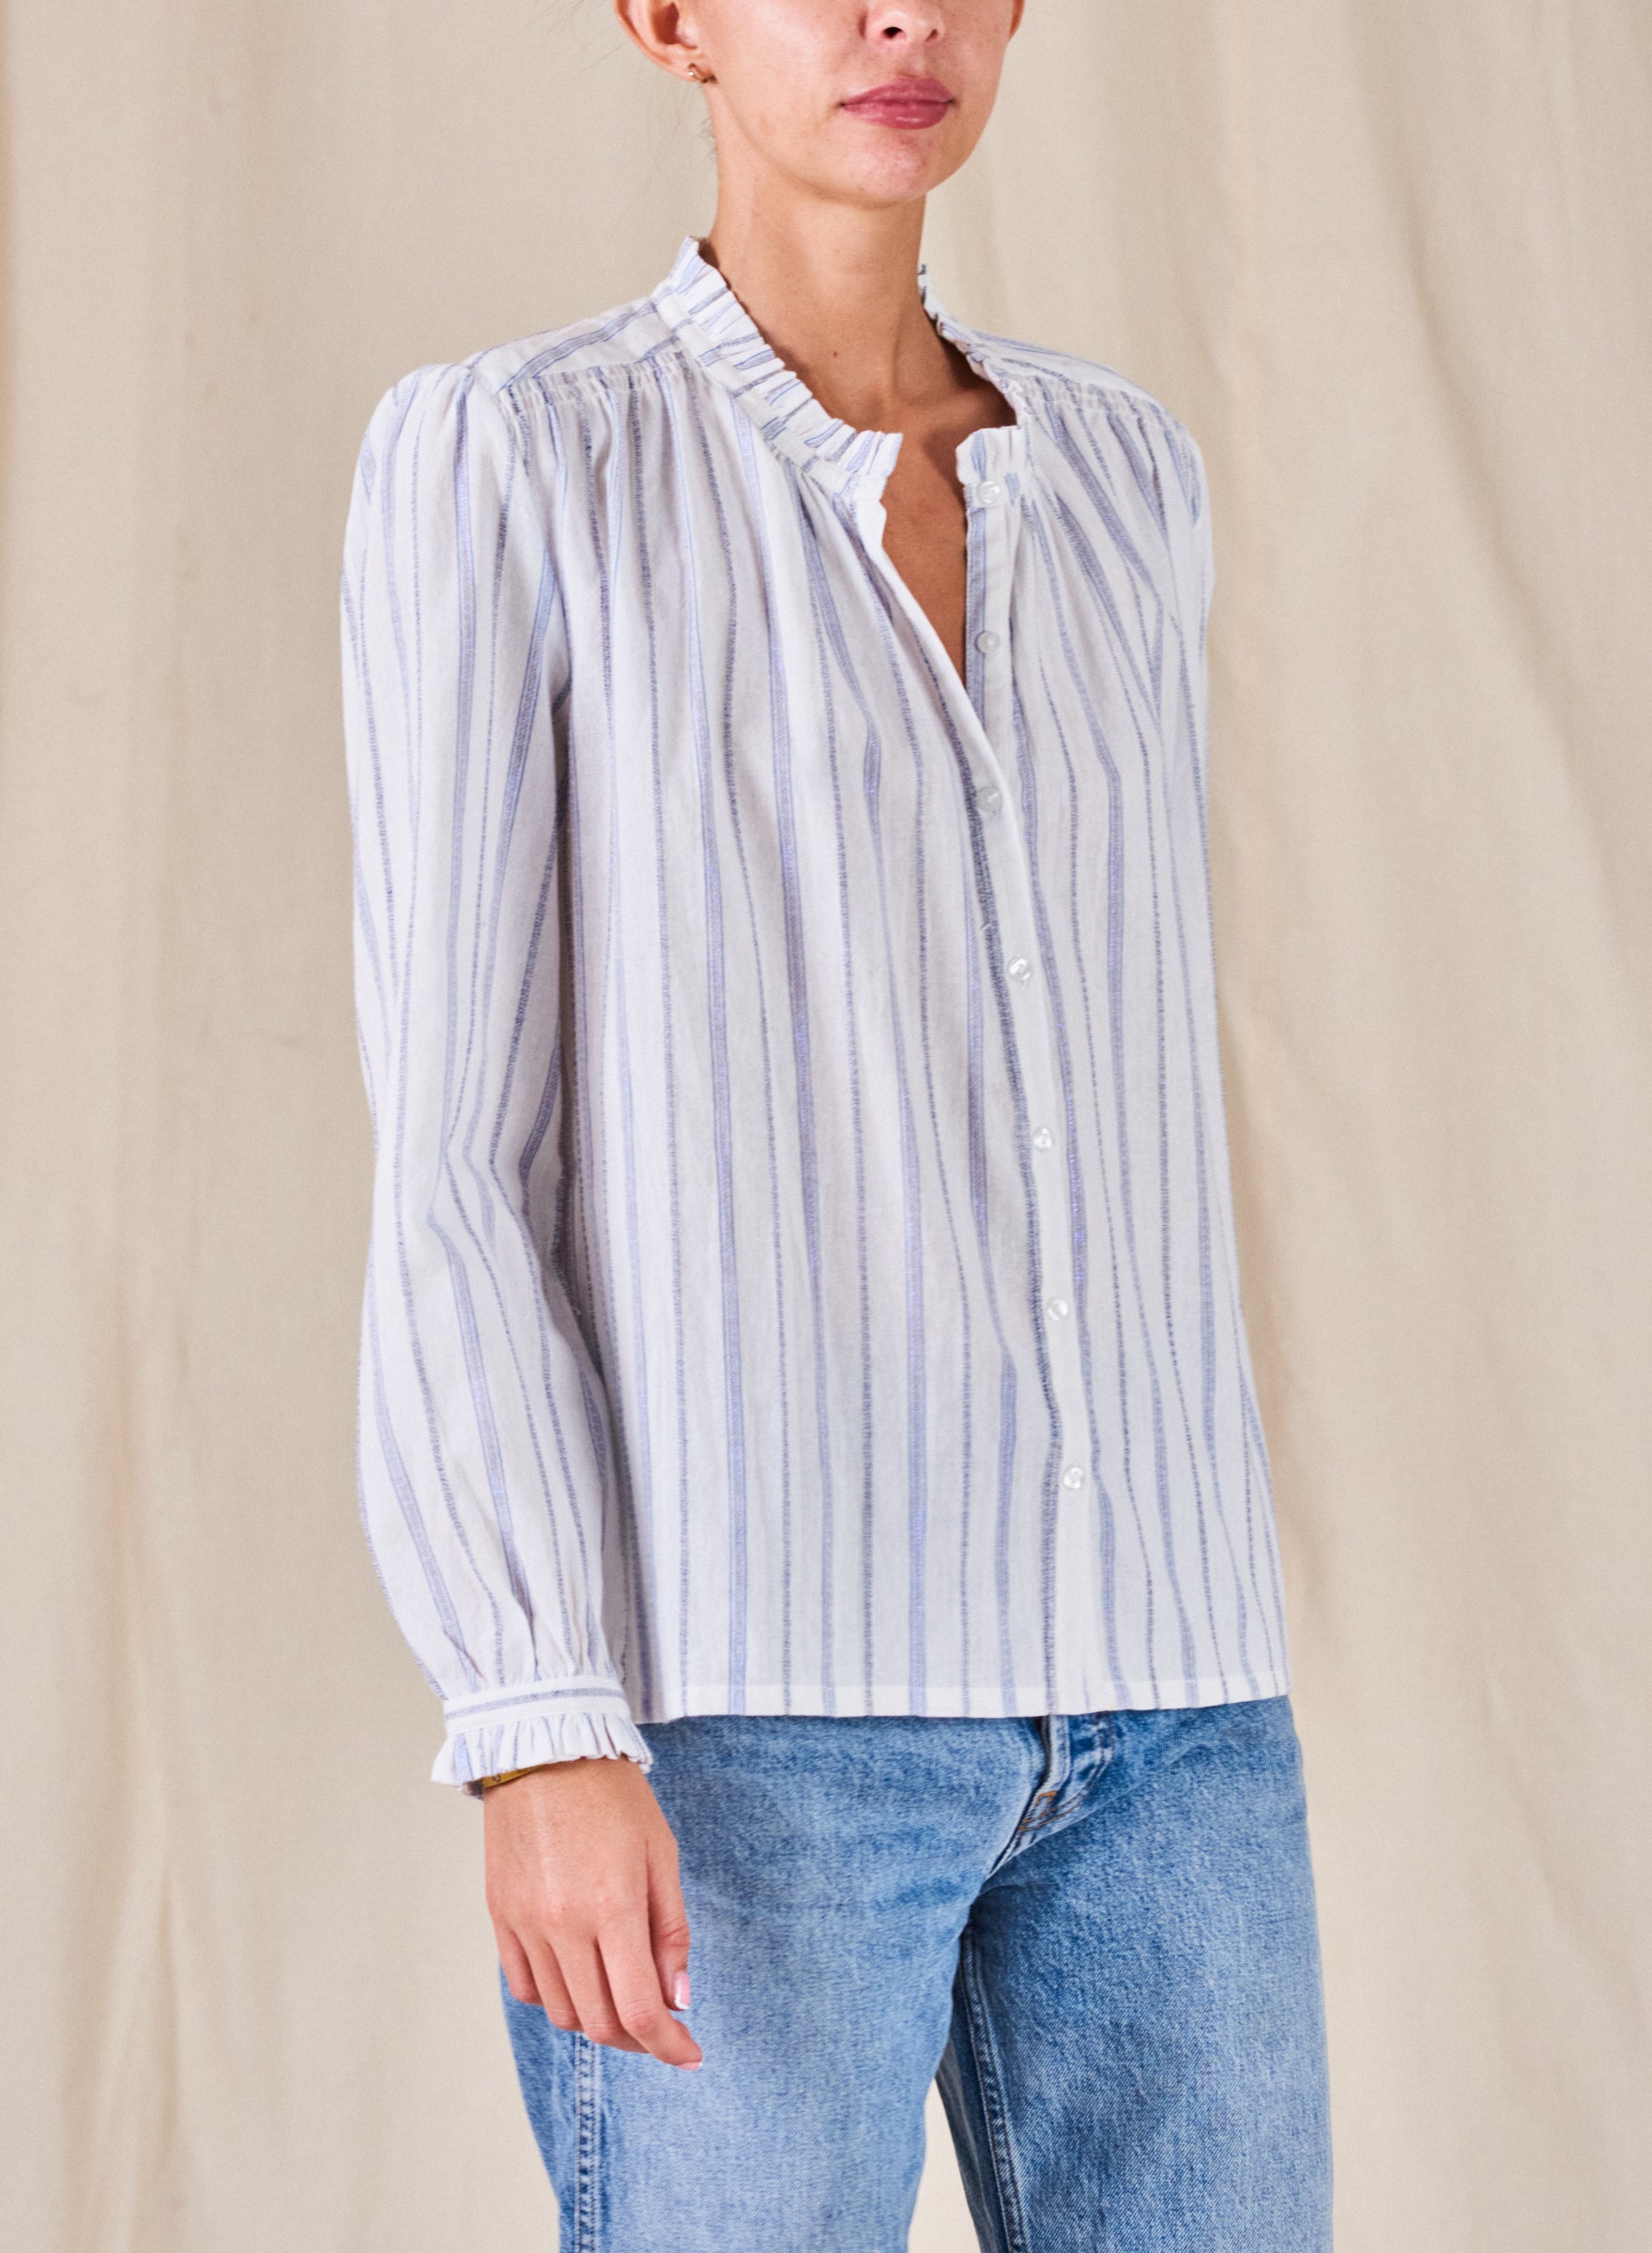 mabe-mabe-chrissie-long-sleeve-top-in-white-and-blue-stripe